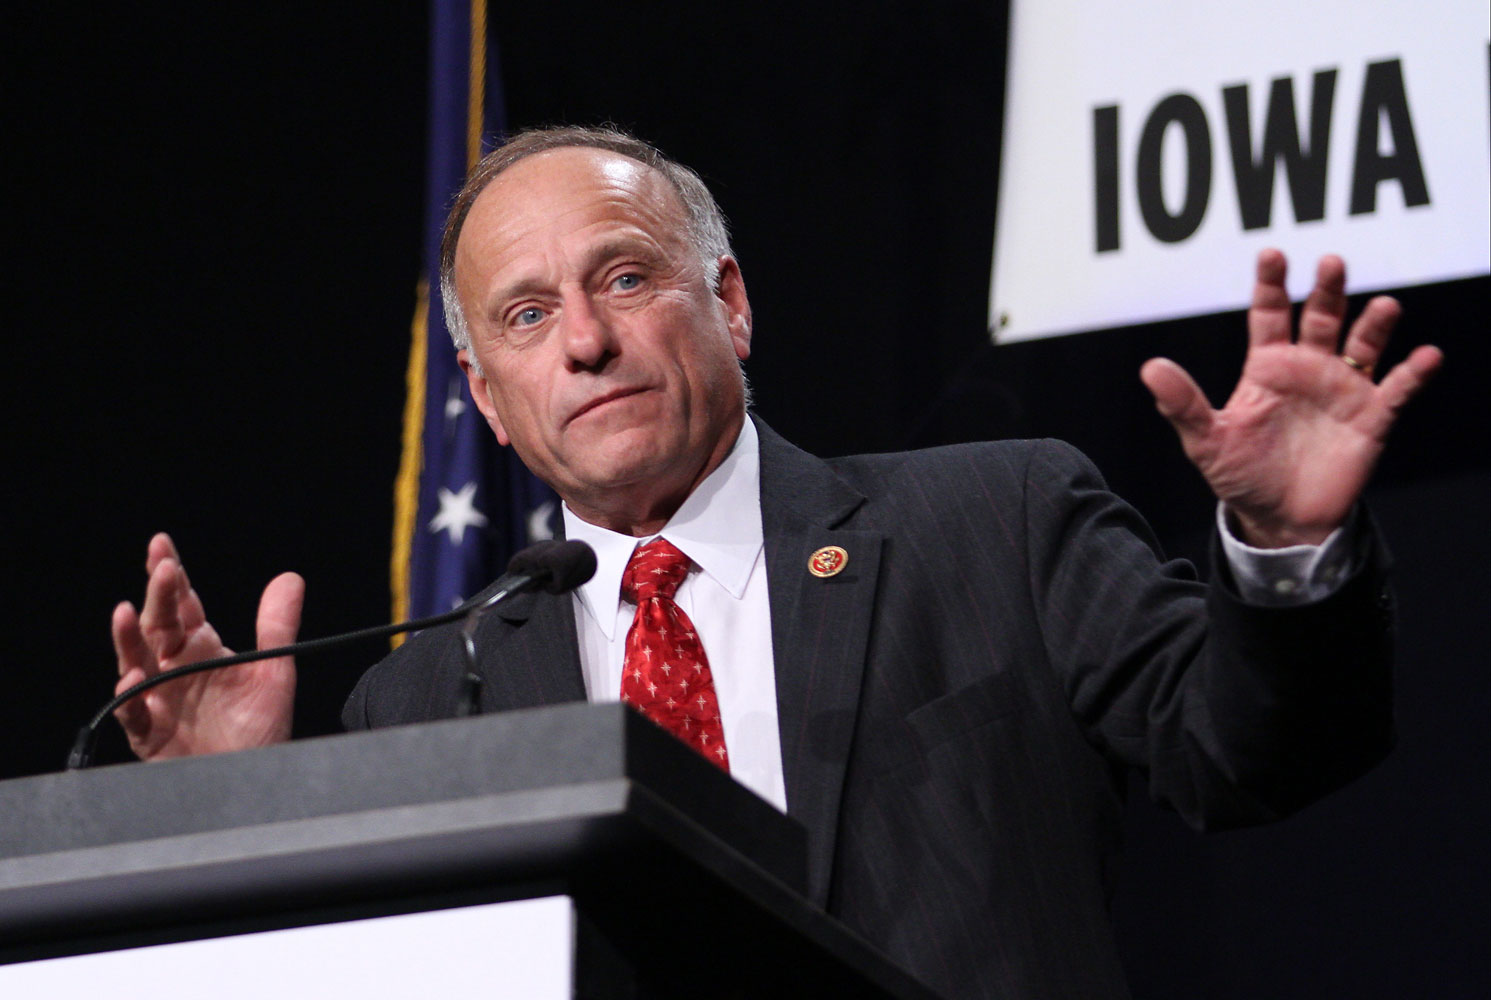 Rep. Steve King speaks during the Iowa Faith and Freedom Coalition's Friends of the Family Banquet in Des Moines, Iowa, Nov. 9, 2013.